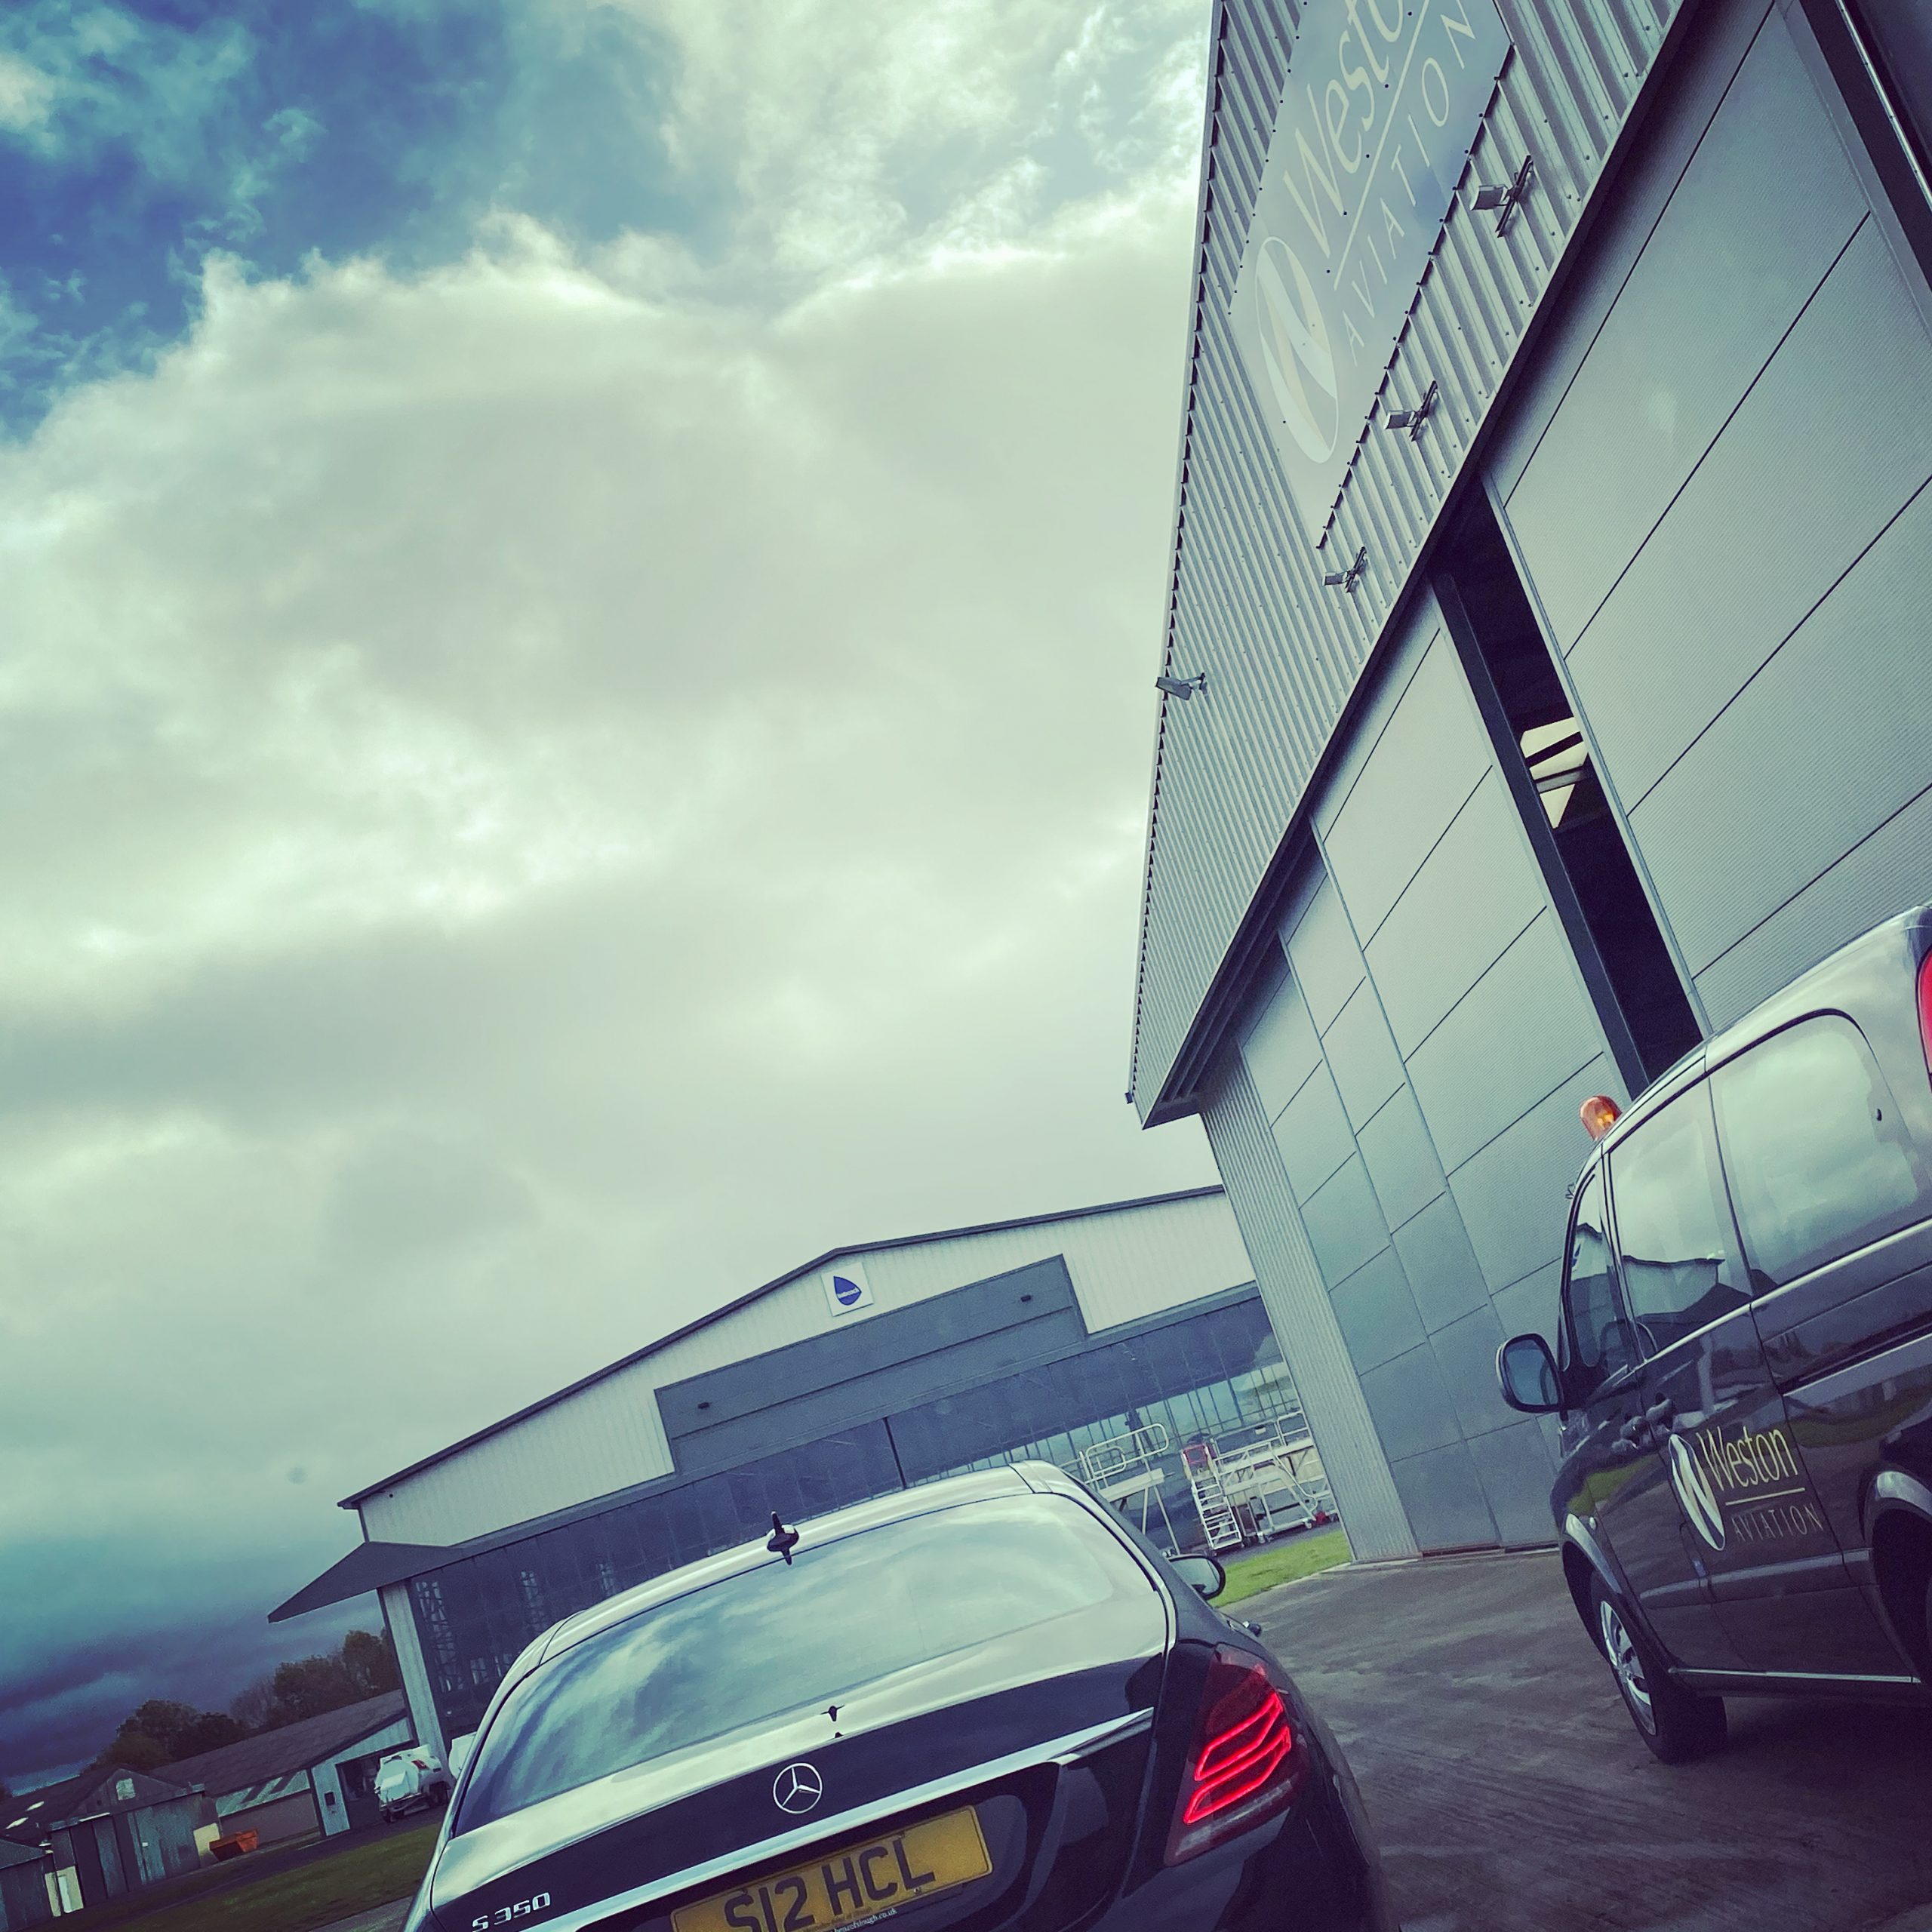 Weston Aviation Gloucestershire Airport Private Jet Chauffeured Transfers